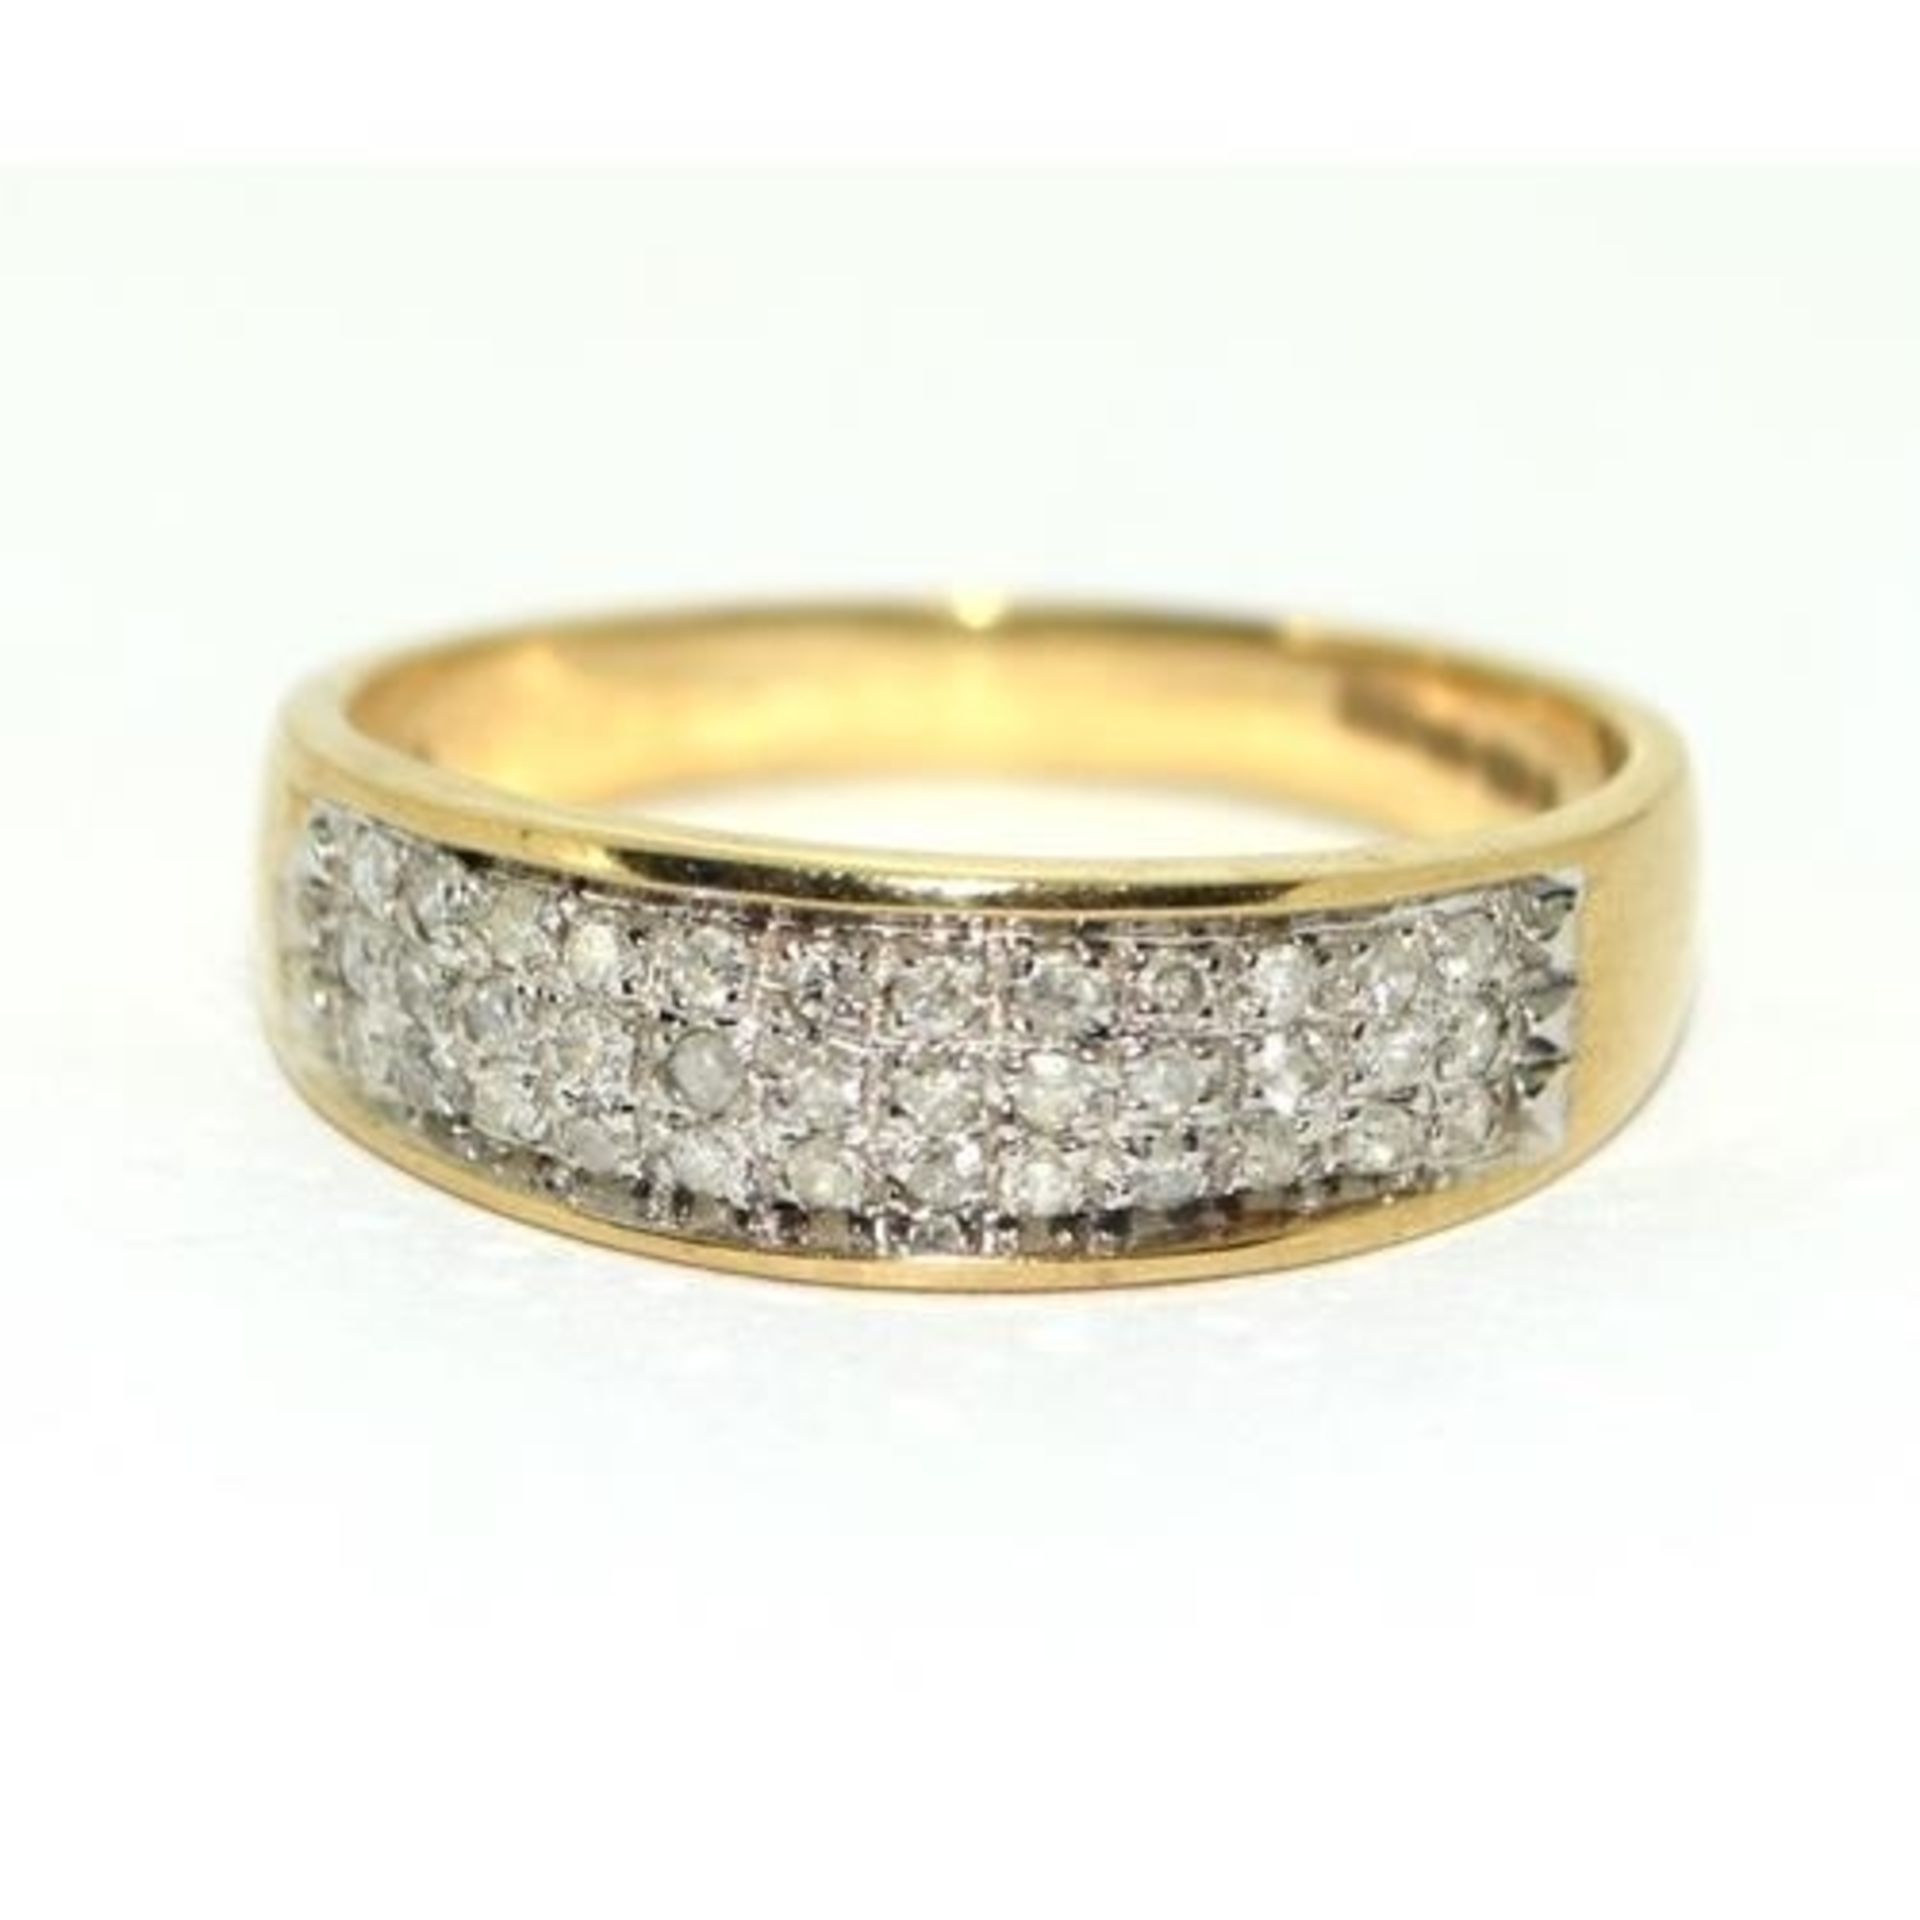 9ct gold ladies diamond ring hallmarked in the ring as 0.25 ct size T - Image 5 of 5